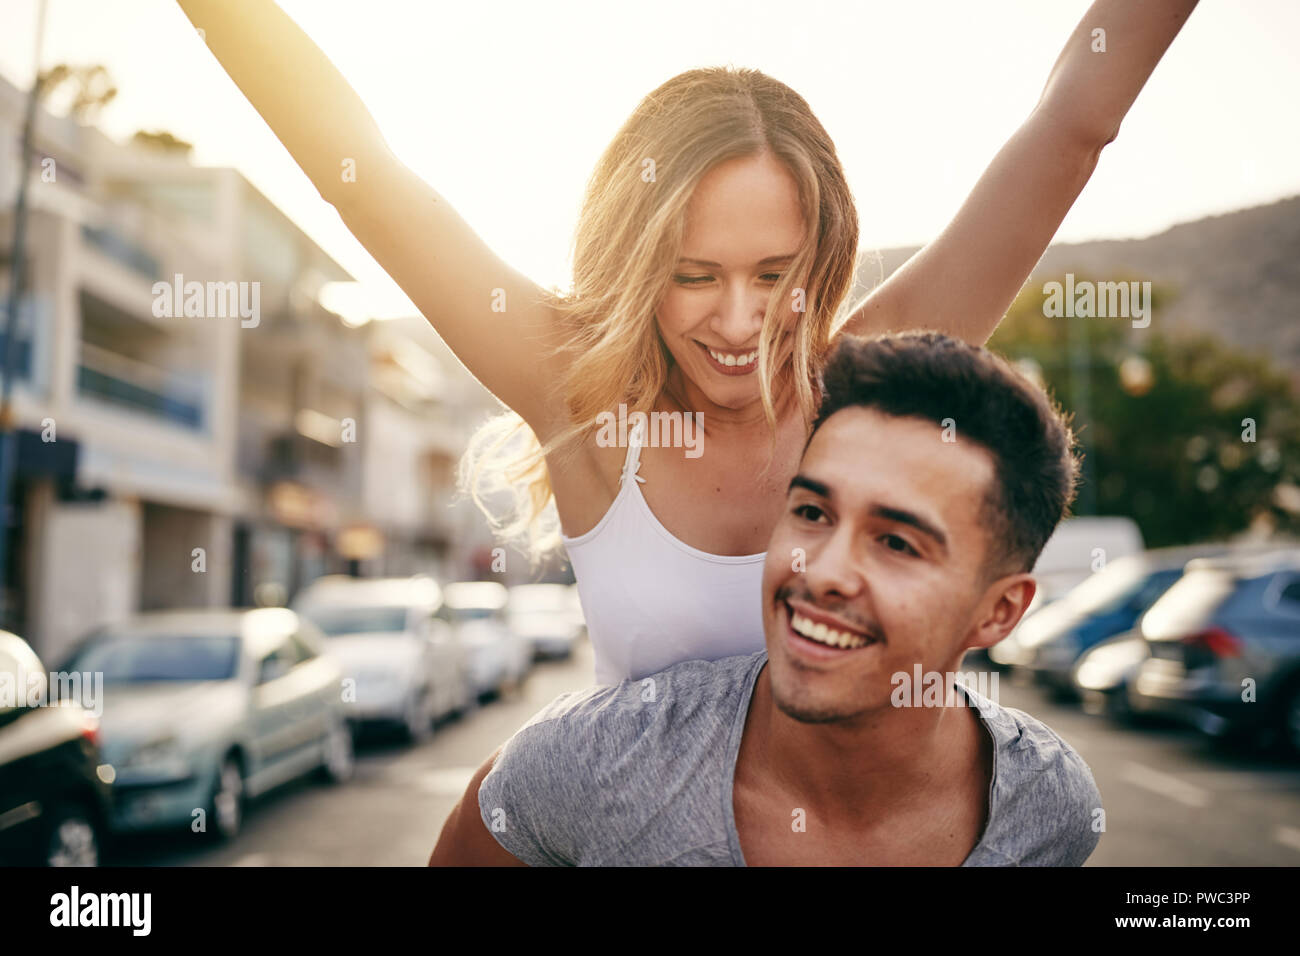 Laughing young woman with her arms raised being being carried on her boyfriend's shoulders down a street in the city Stock Photo